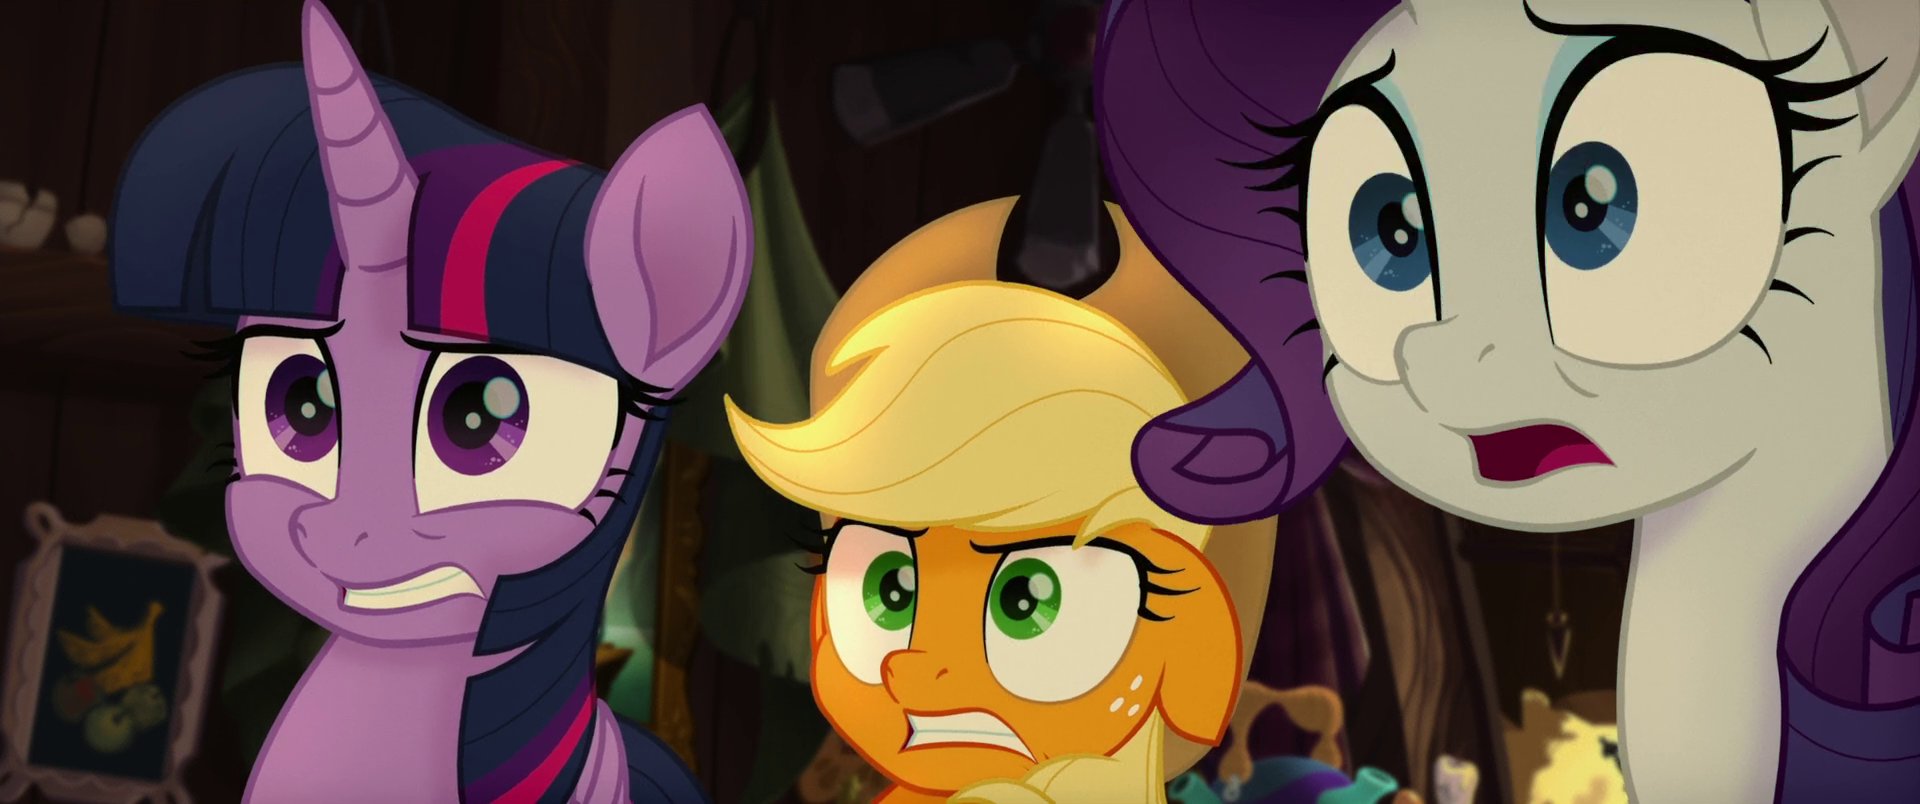 Image Main ponies shocked by Tempest's appearance MLPTM.png My